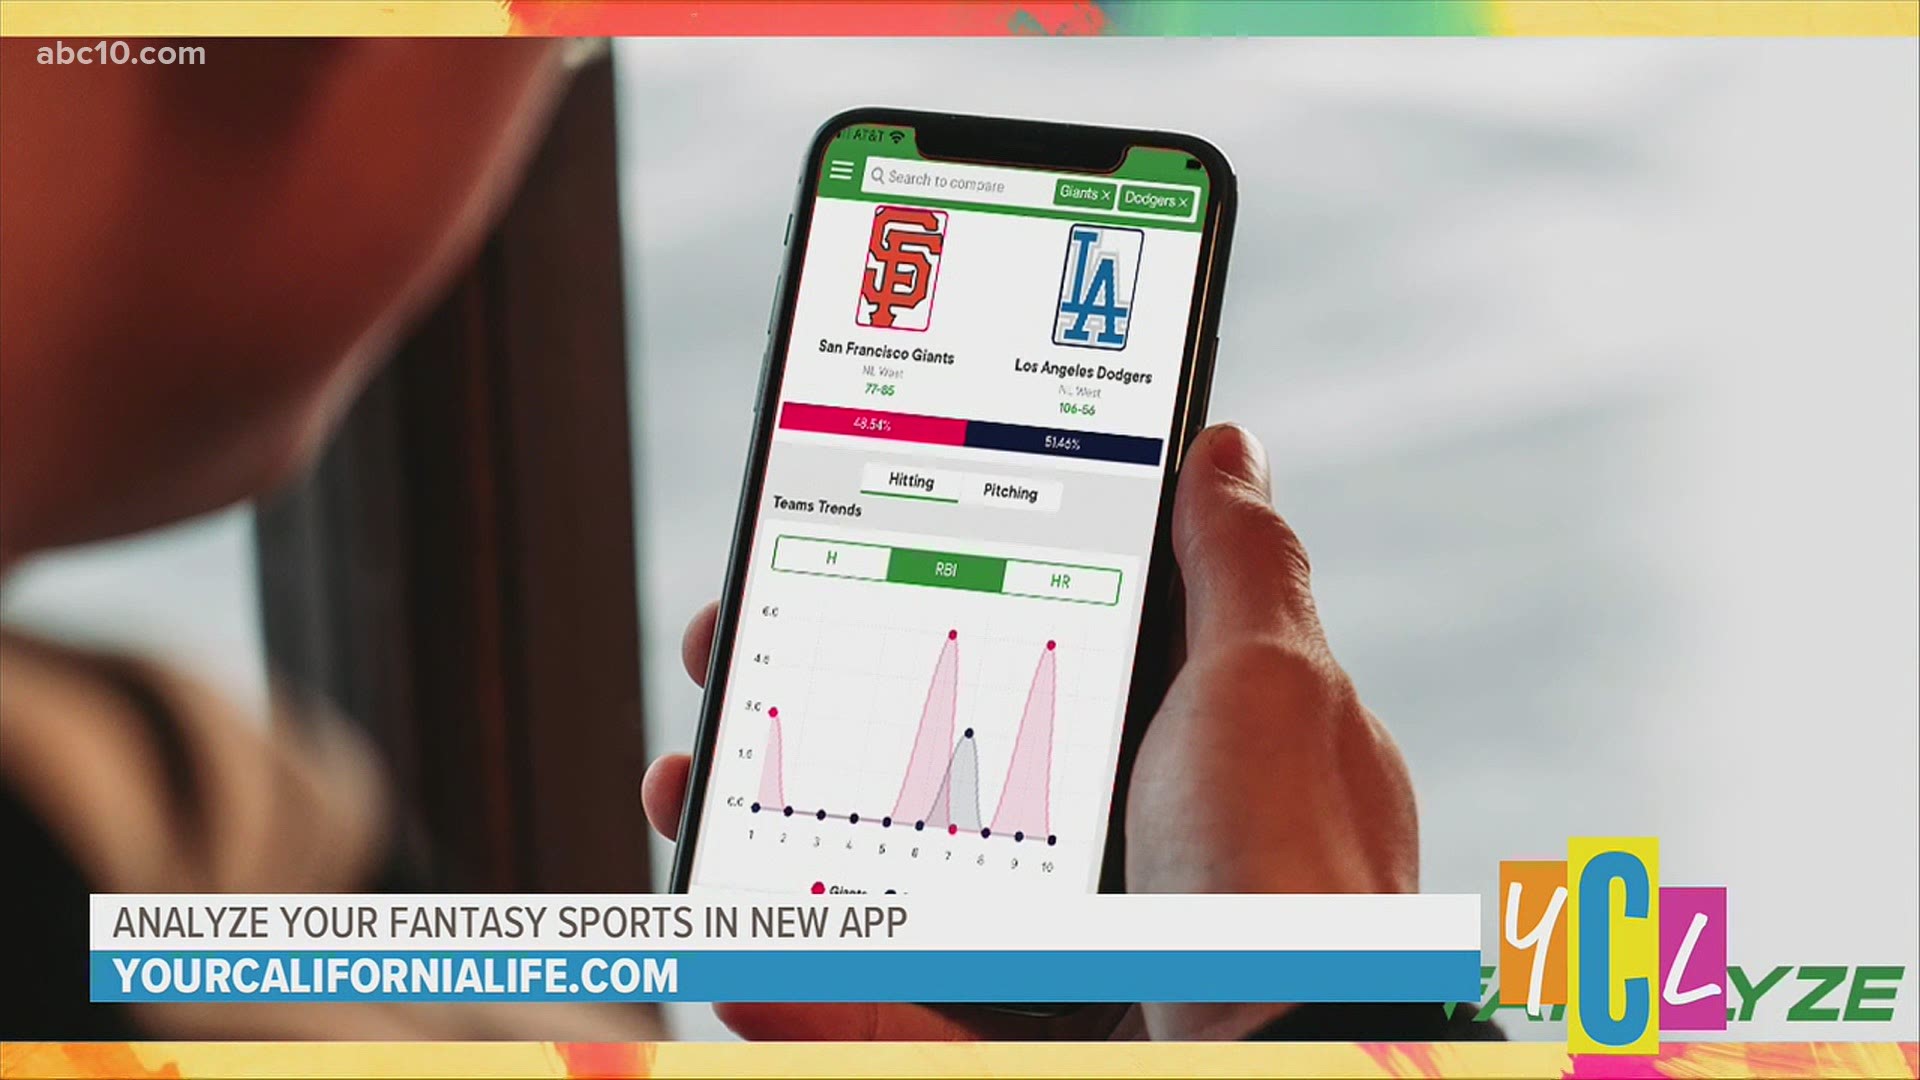 Learn about Sacramento's growing startup ecosystem along with how one entrepreneur is making the most of local resources available to score with his Fanalyze app.